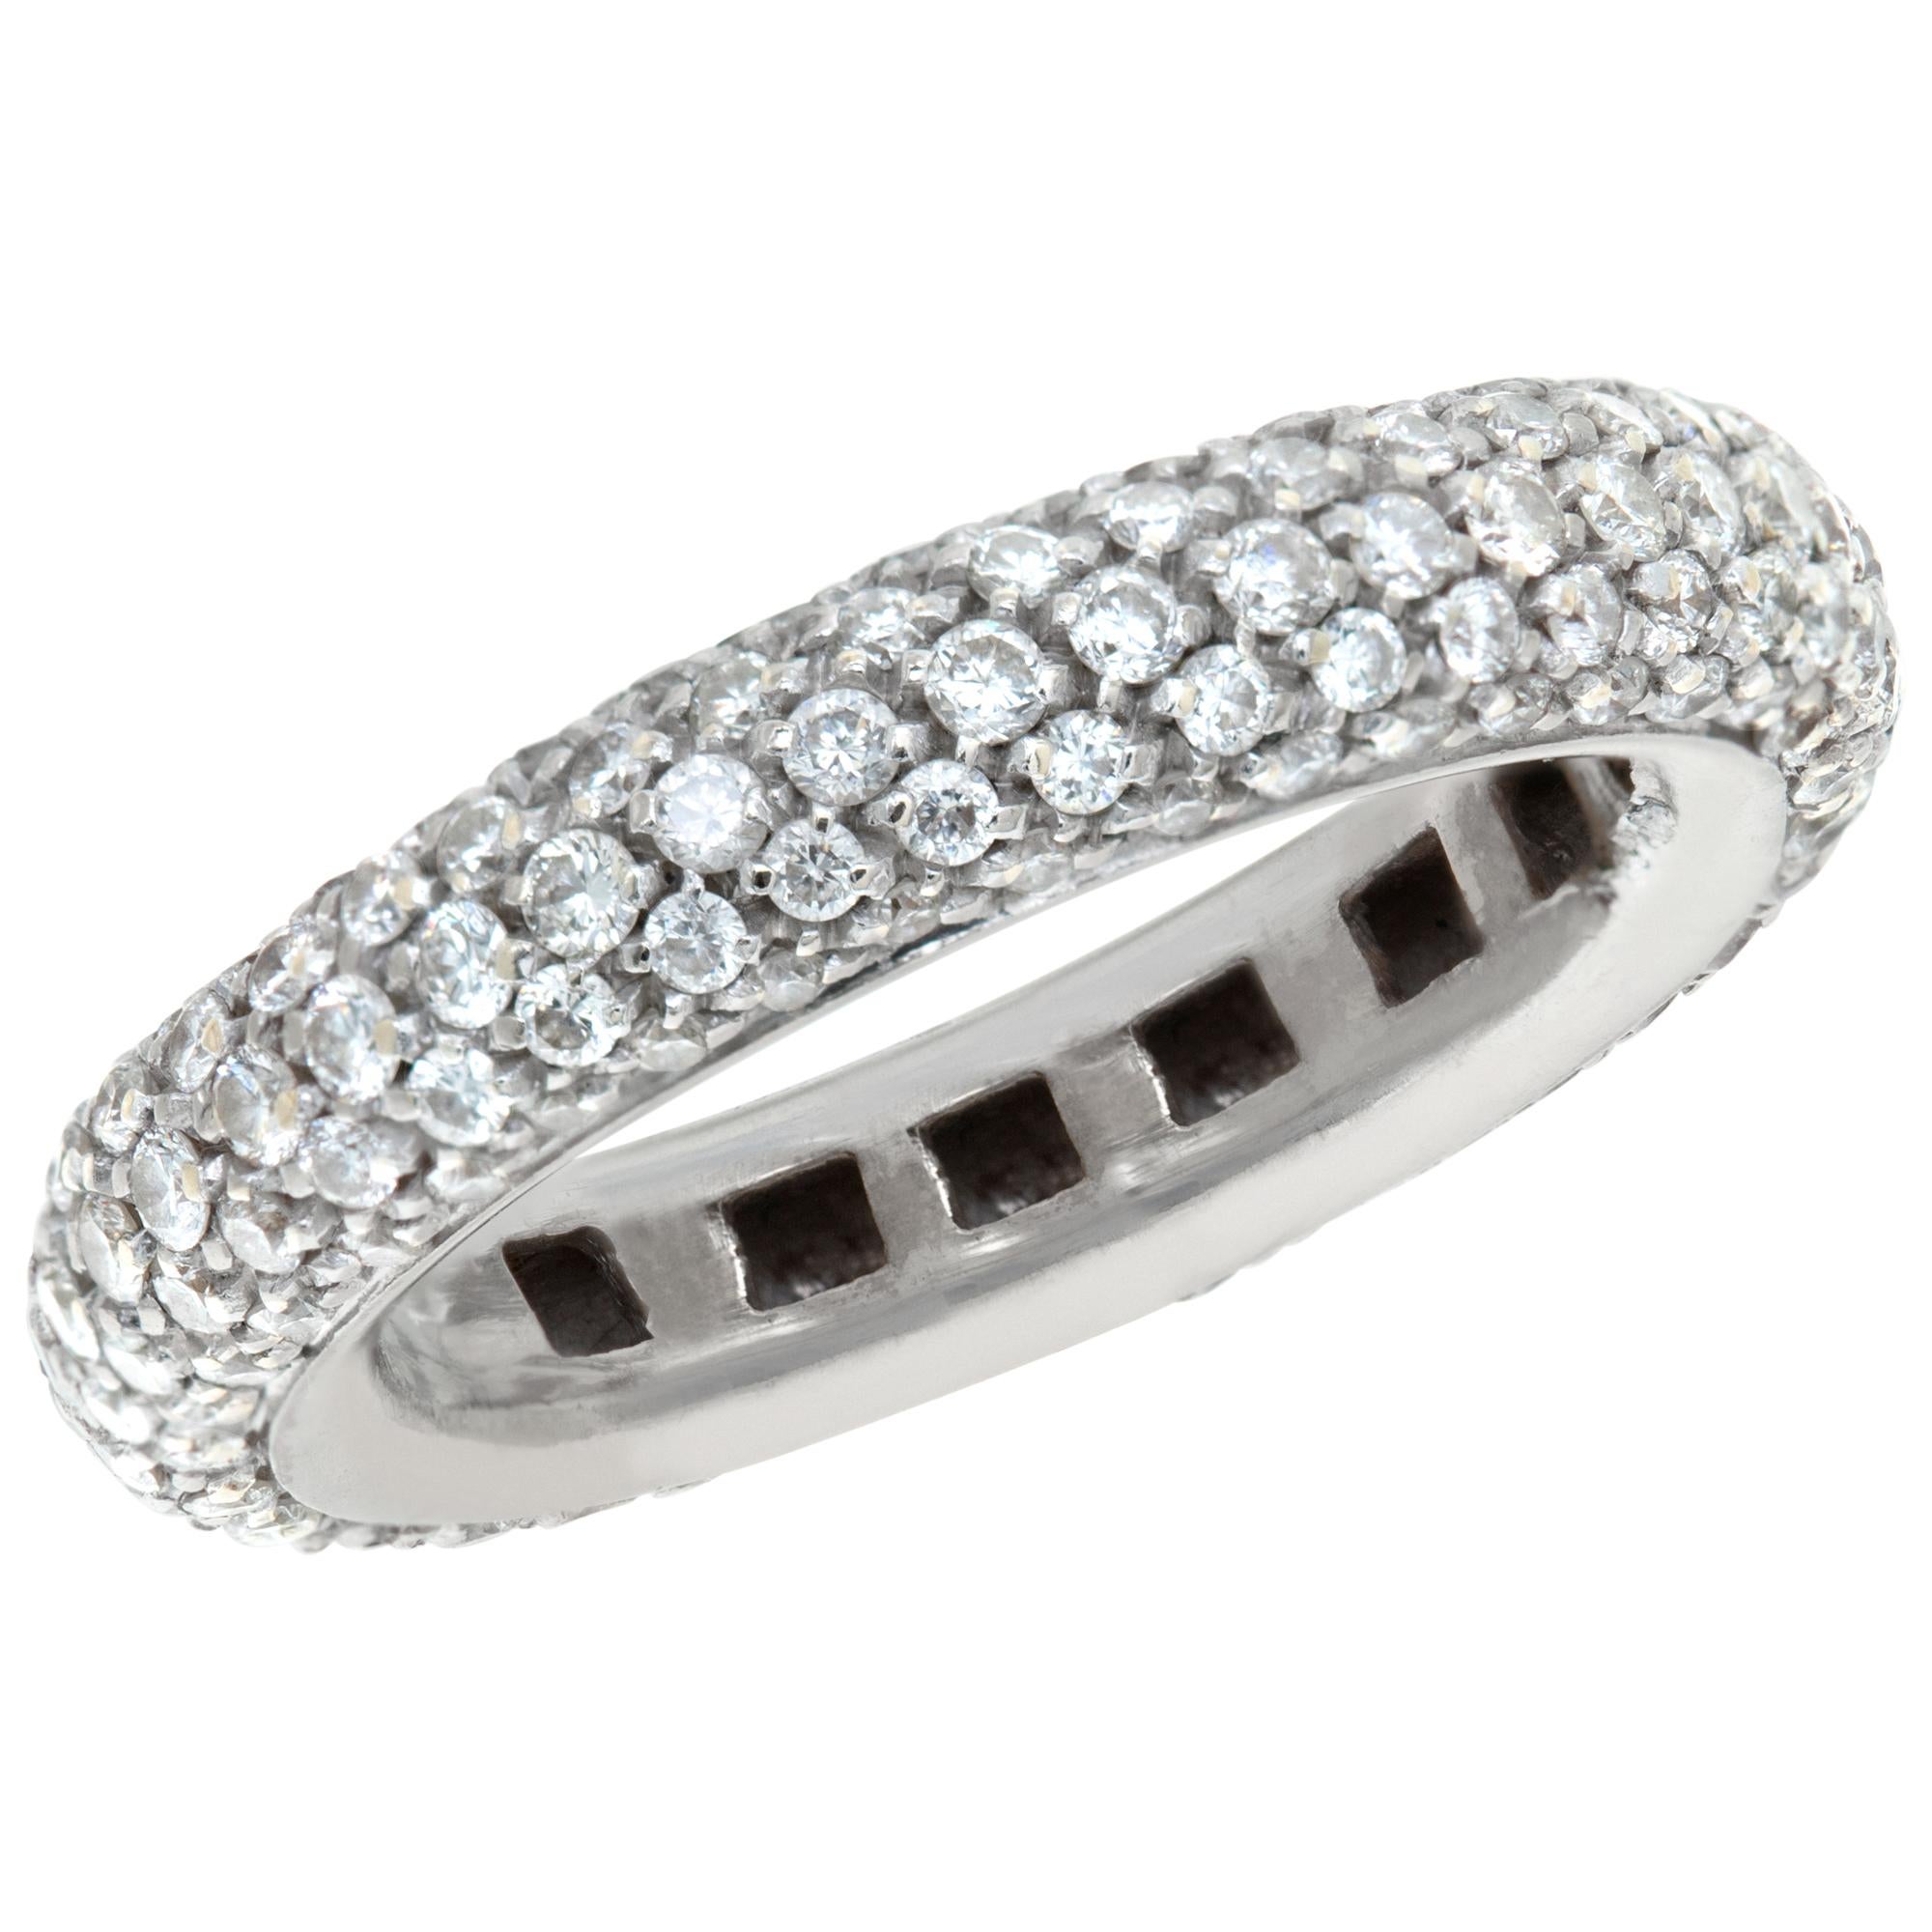 White gold Antonini Milano eternity band with round brilliant cut diamonds In Excellent Condition For Sale In Surfside, FL